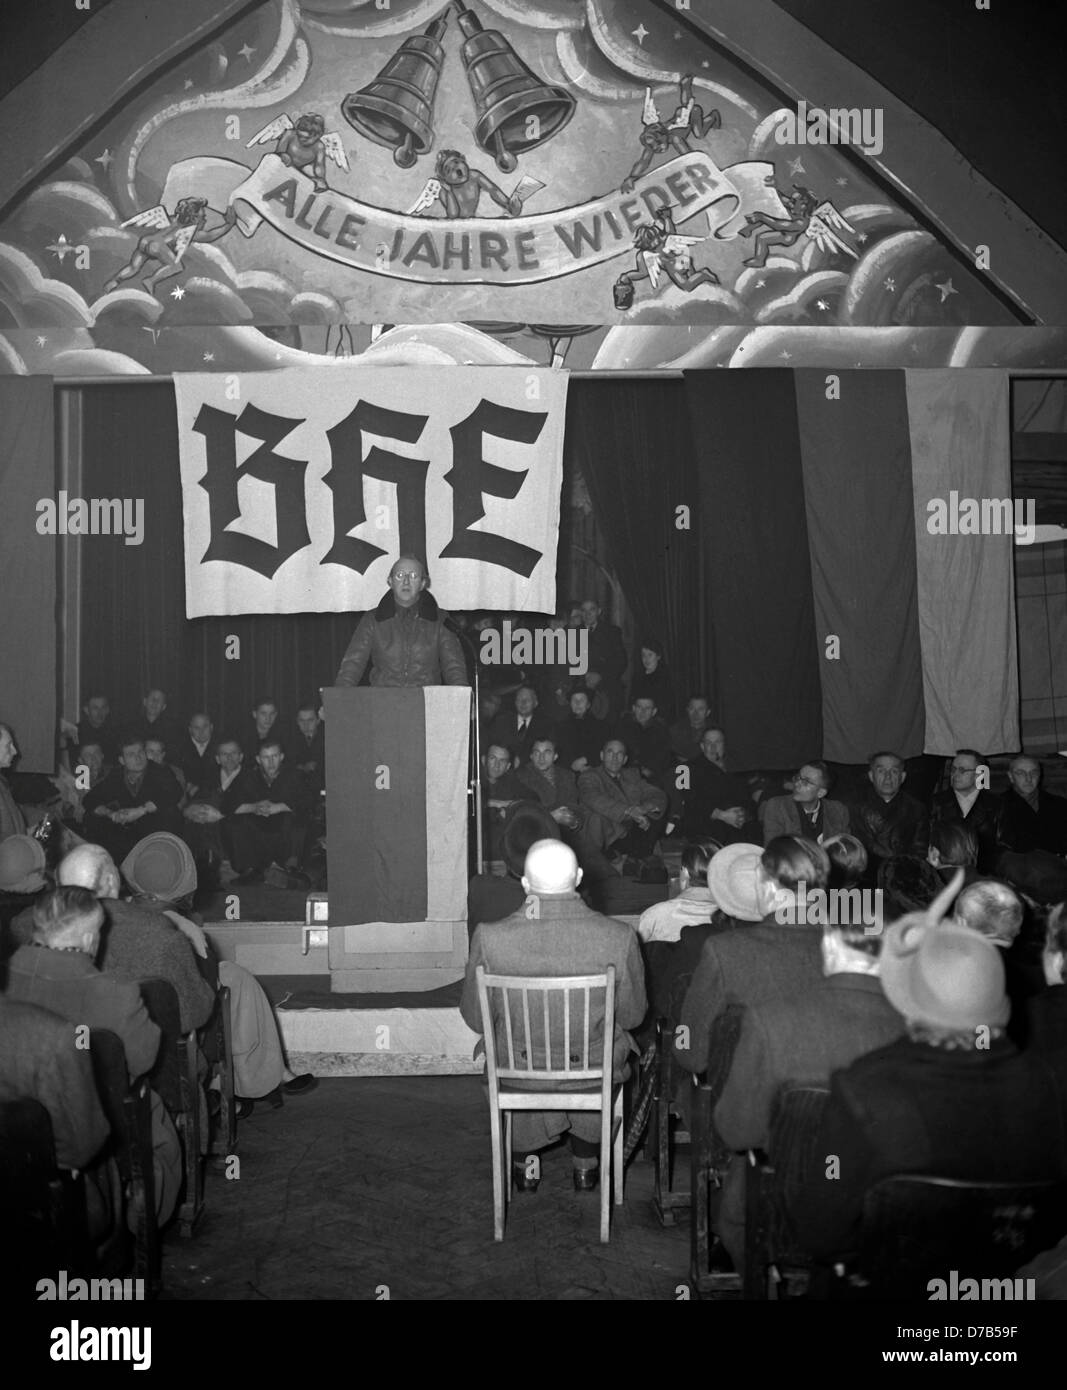 A big event of the Bund der Heimatvertriebenen und Entrechteten (BHE, League of Expellees and Deprived of Rights) takes place in the Cuxhaven Bleikenschule school hall, where Hubertus Prinz zu Löwenstein is holding a short speech as the speaker of the invaders, in the evening of the collection of the 'Helgoland occupiers' by the British officers and the German police (3rd January 1951). Stock Photo